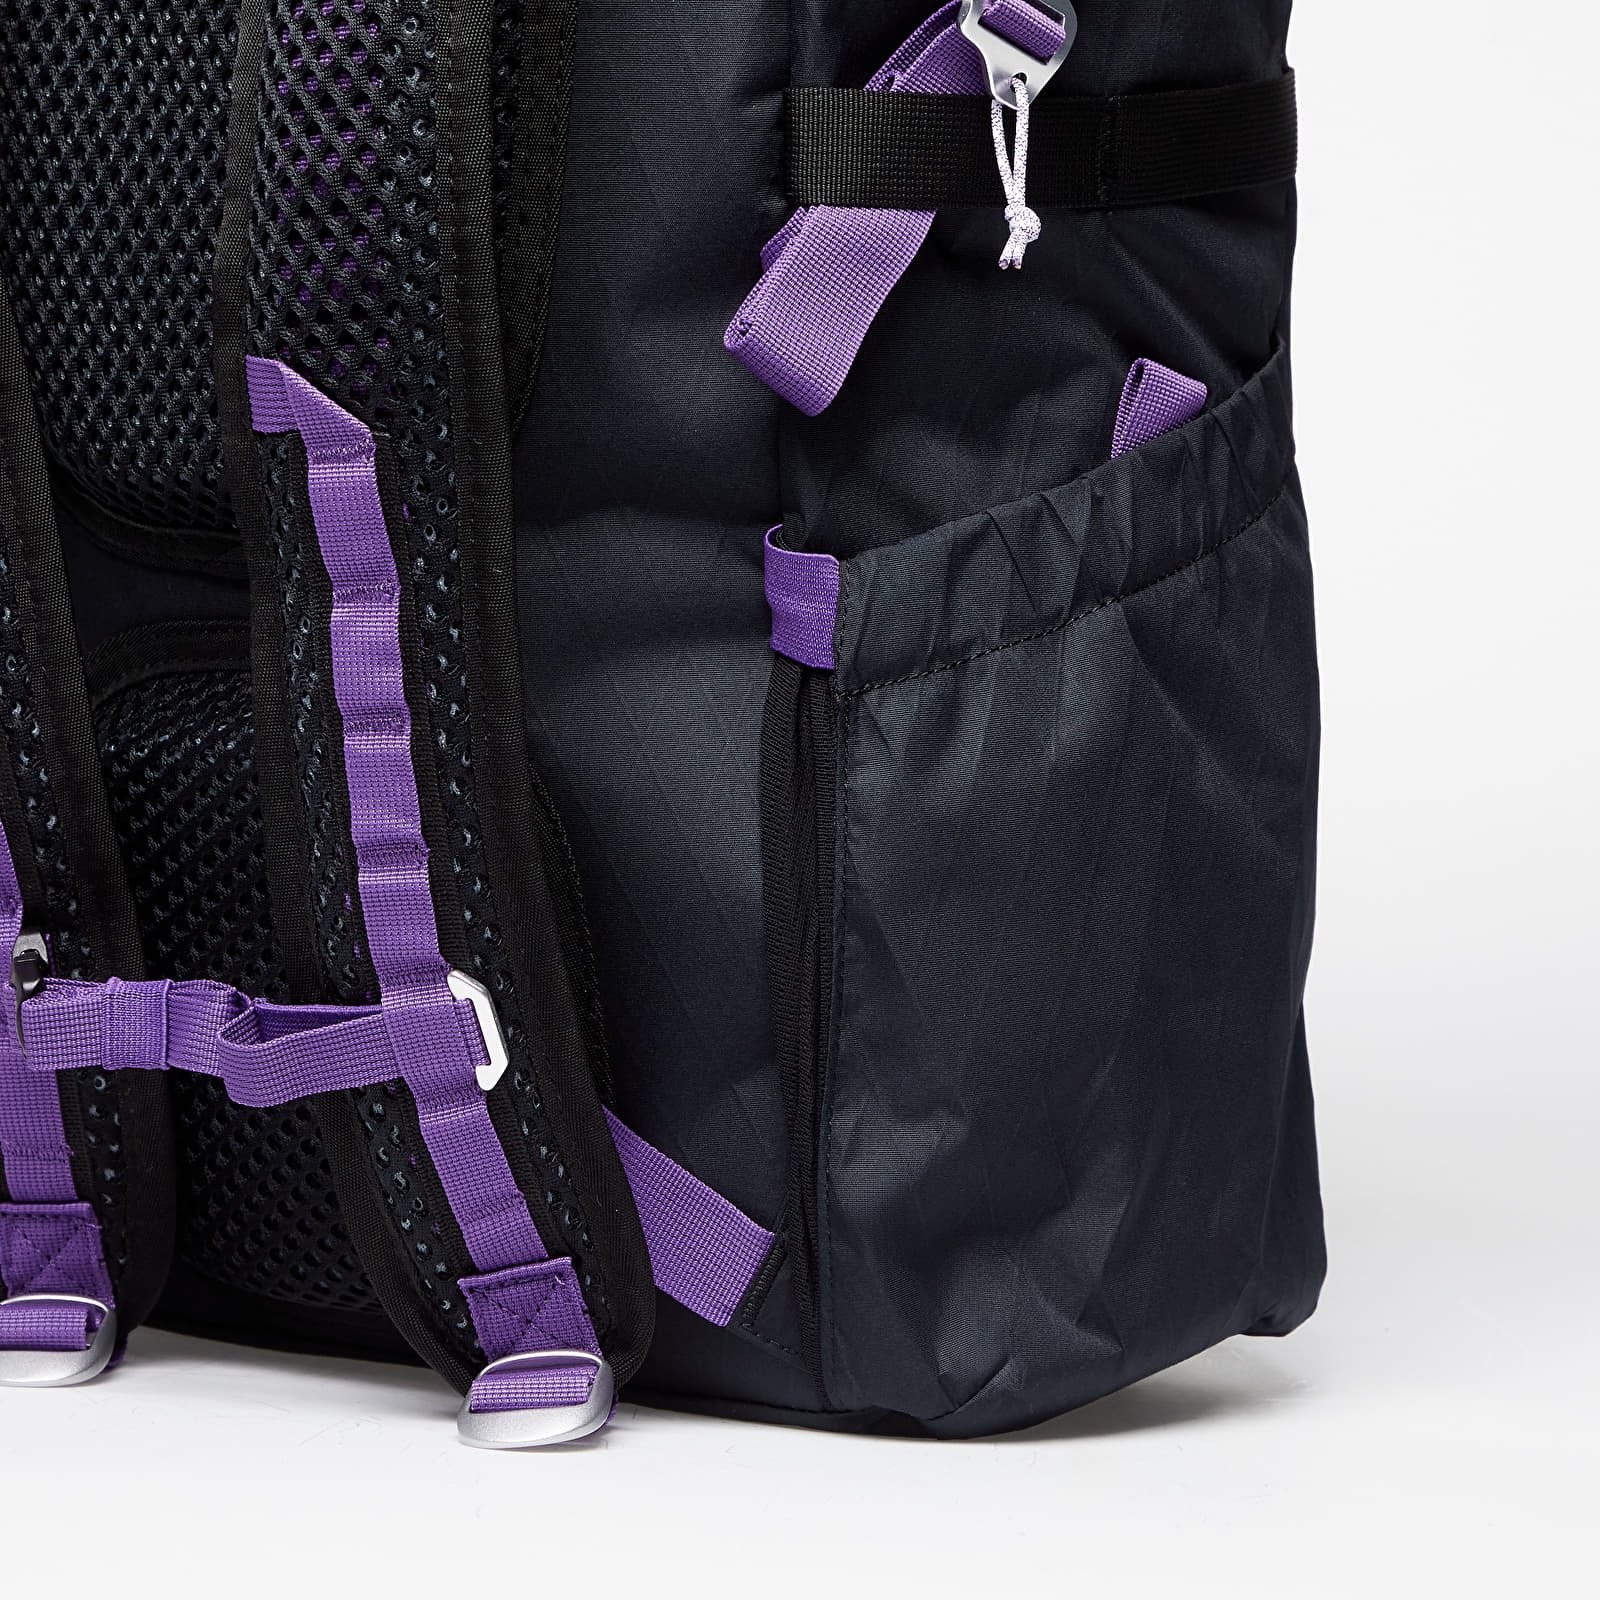 Aysén Day Pack Backpack